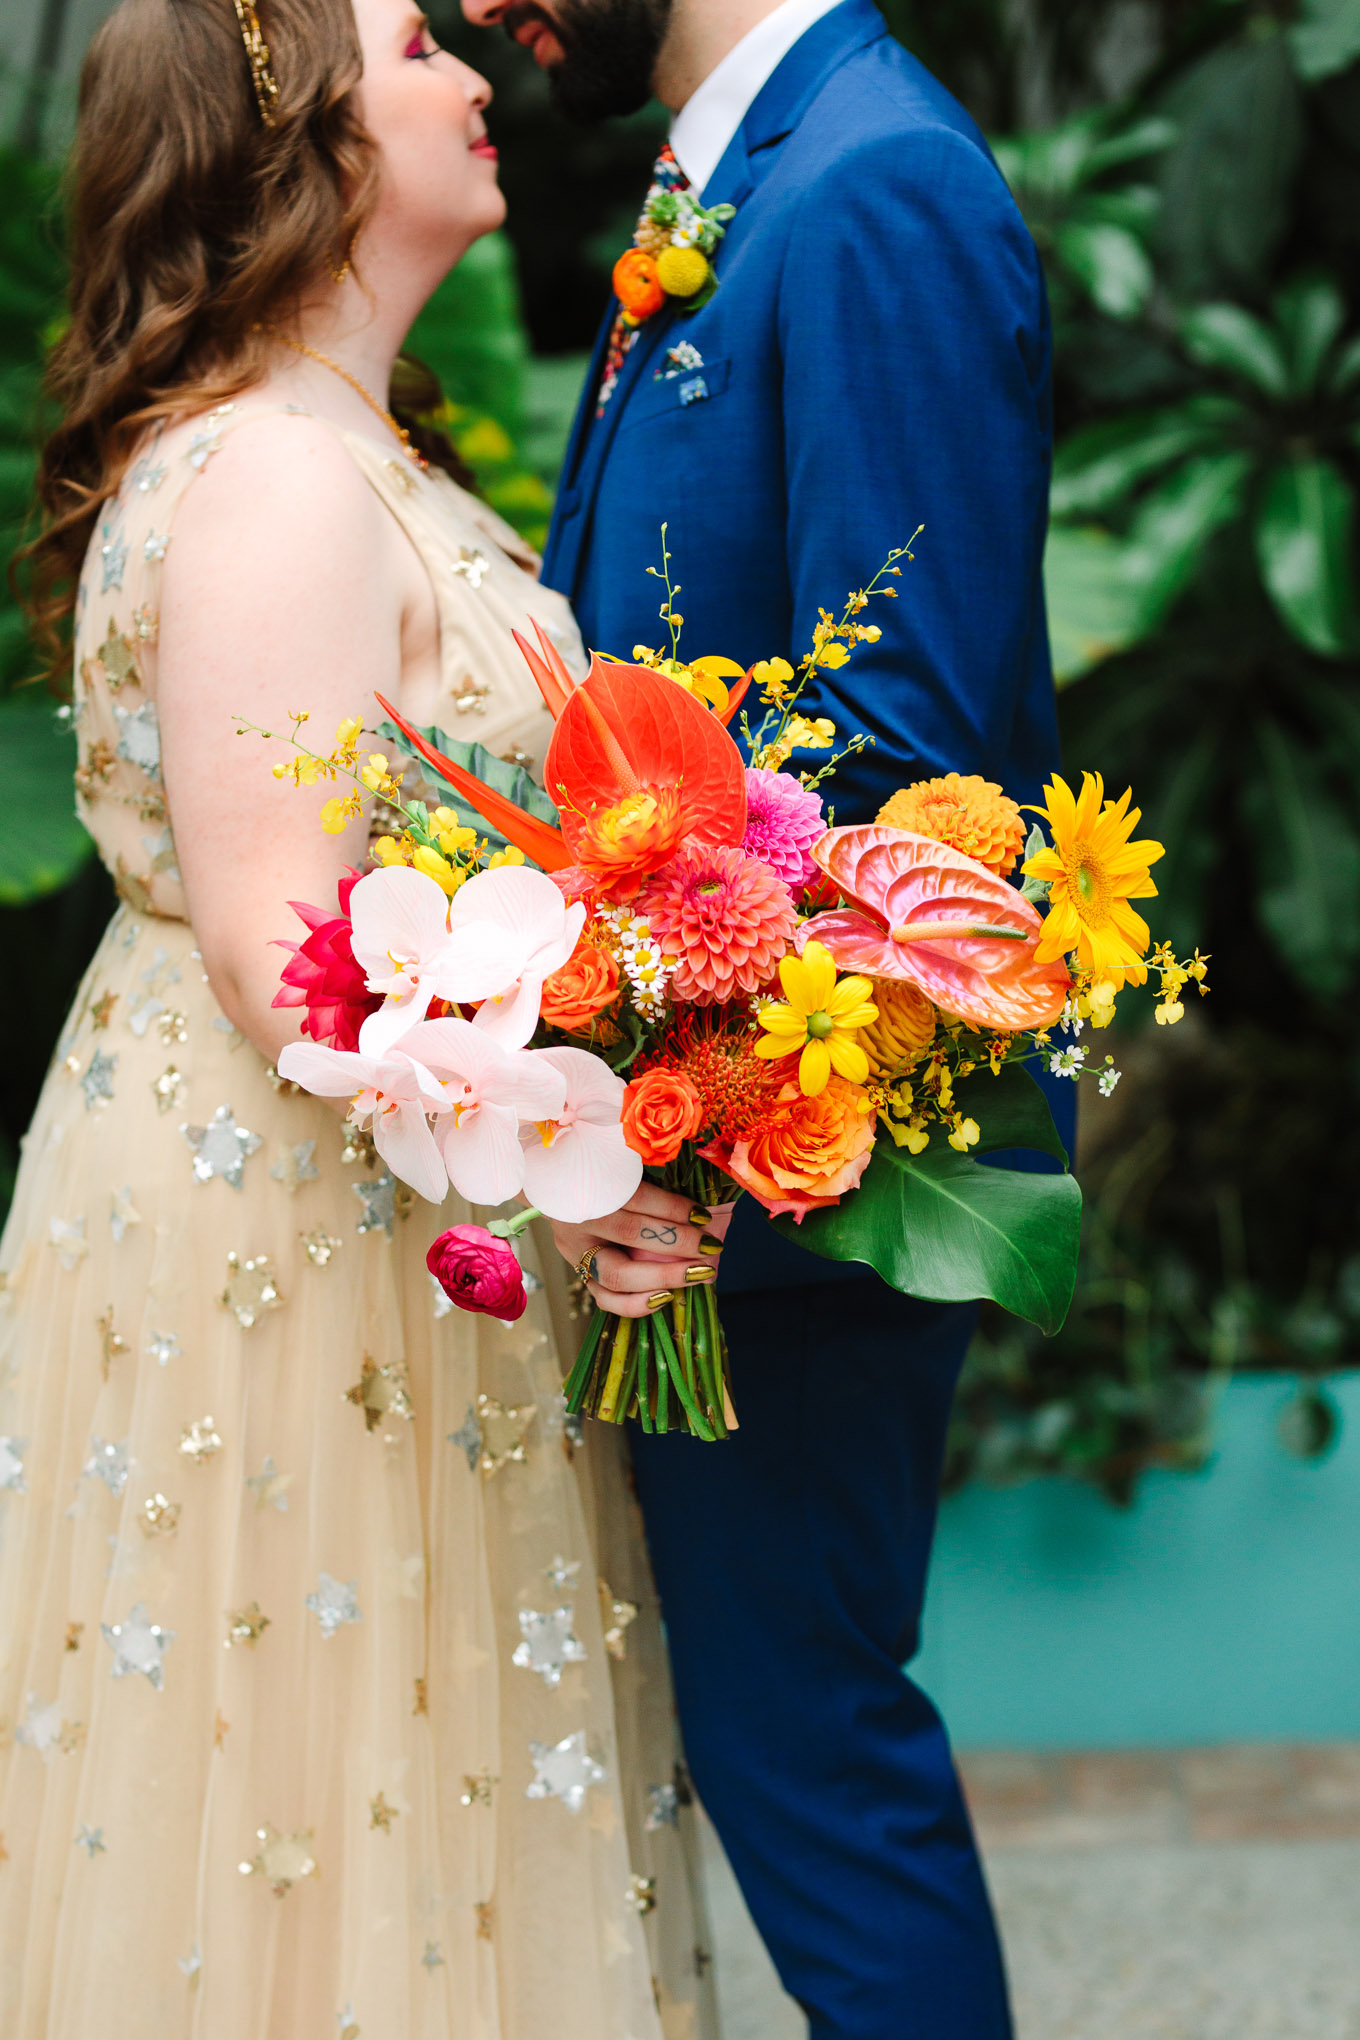 Tropical colorful bouquet by Winston and Main | Colorful Downtown Los Angeles Valentine Wedding | Los Angeles wedding photographer | #losangeleswedding #colorfulwedding #DTLA #valentinedtla   Source: Mary Costa Photography | Los Angeles